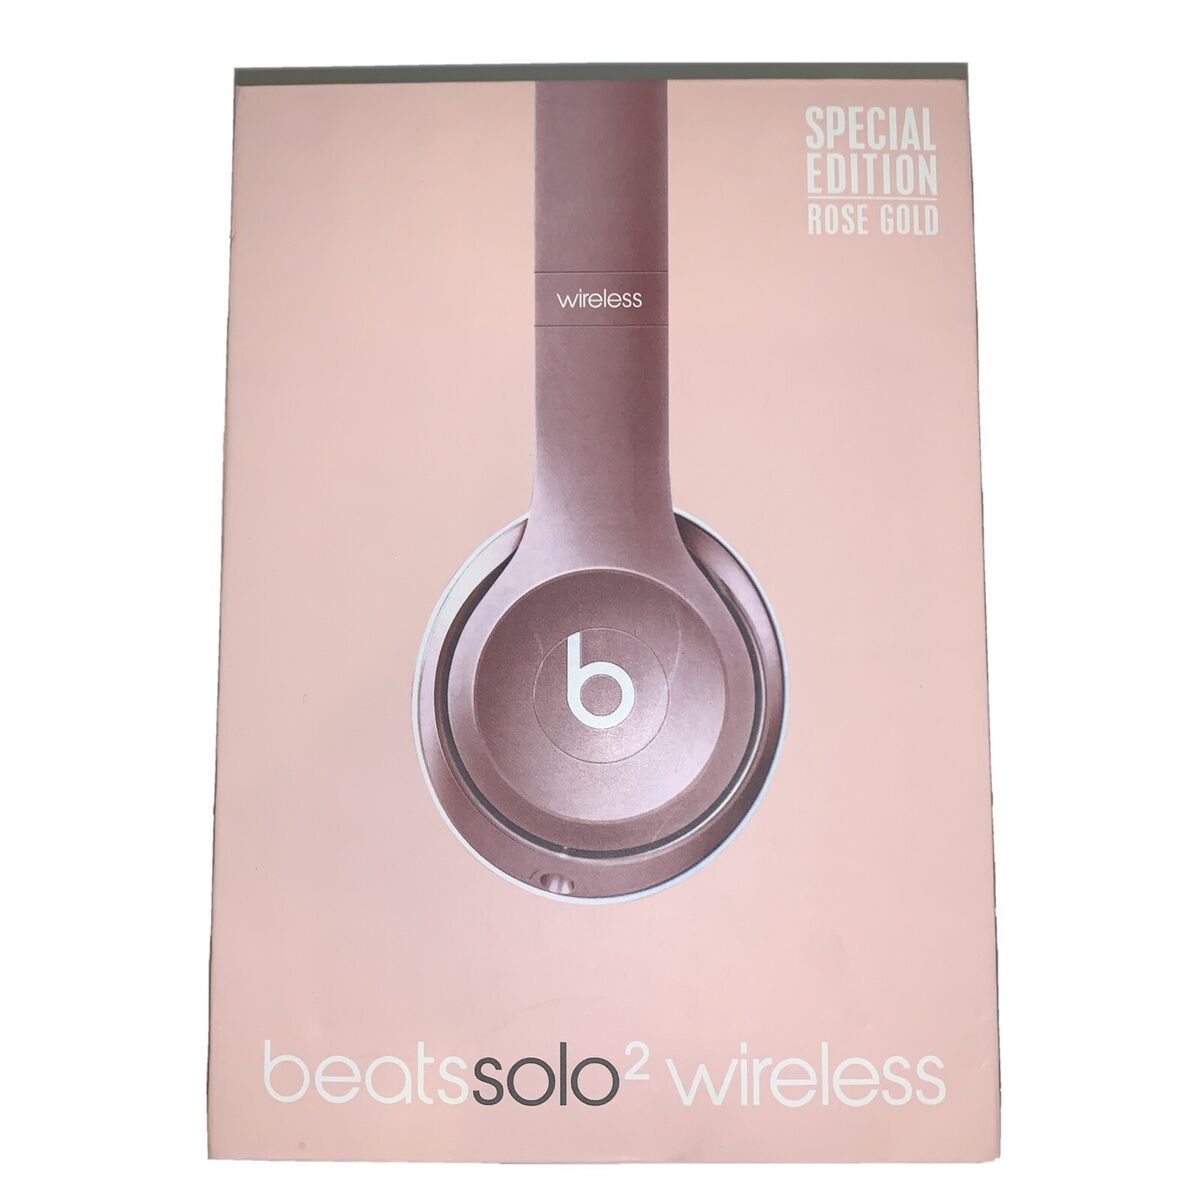 BOX ONLY Beats Solo 2 Wireless Special Edition Rose Gold Dr. Dre Headphones  BOX